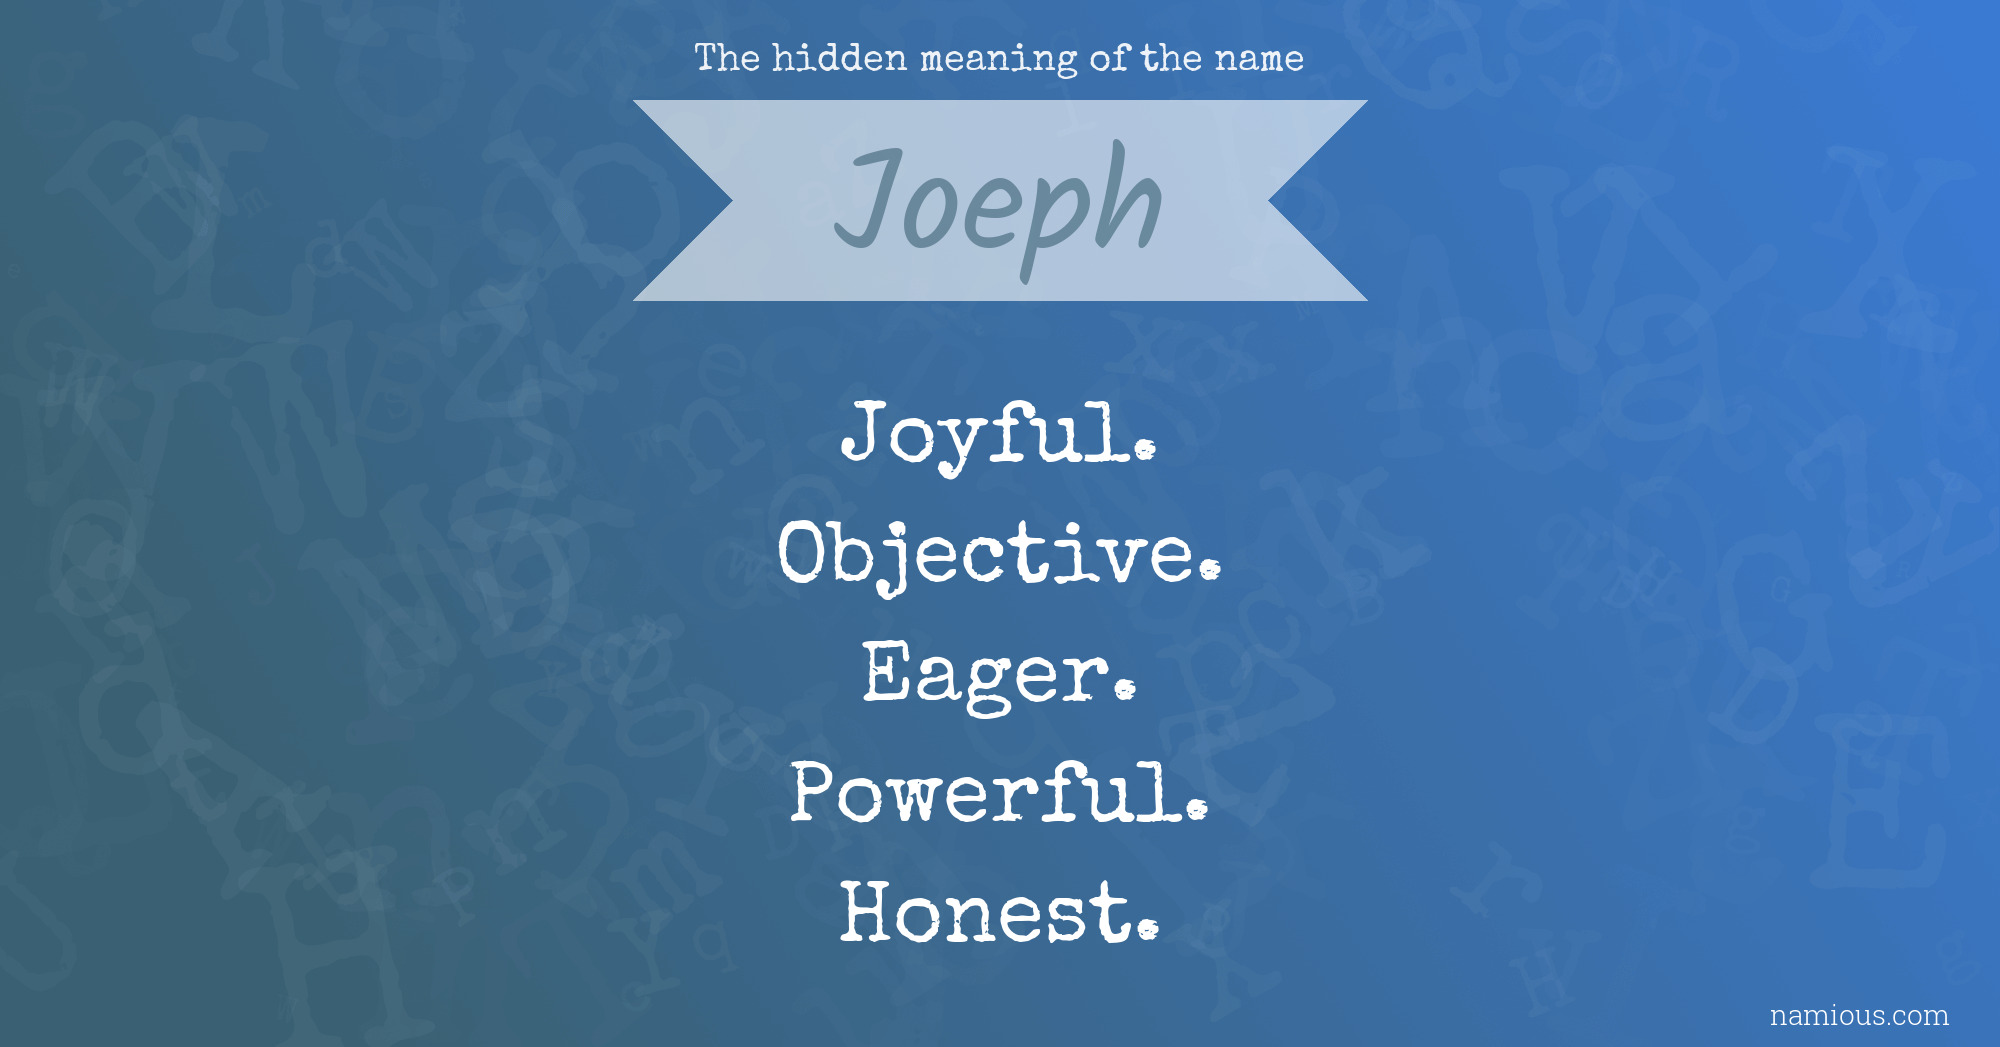 The hidden meaning of the name Joeph